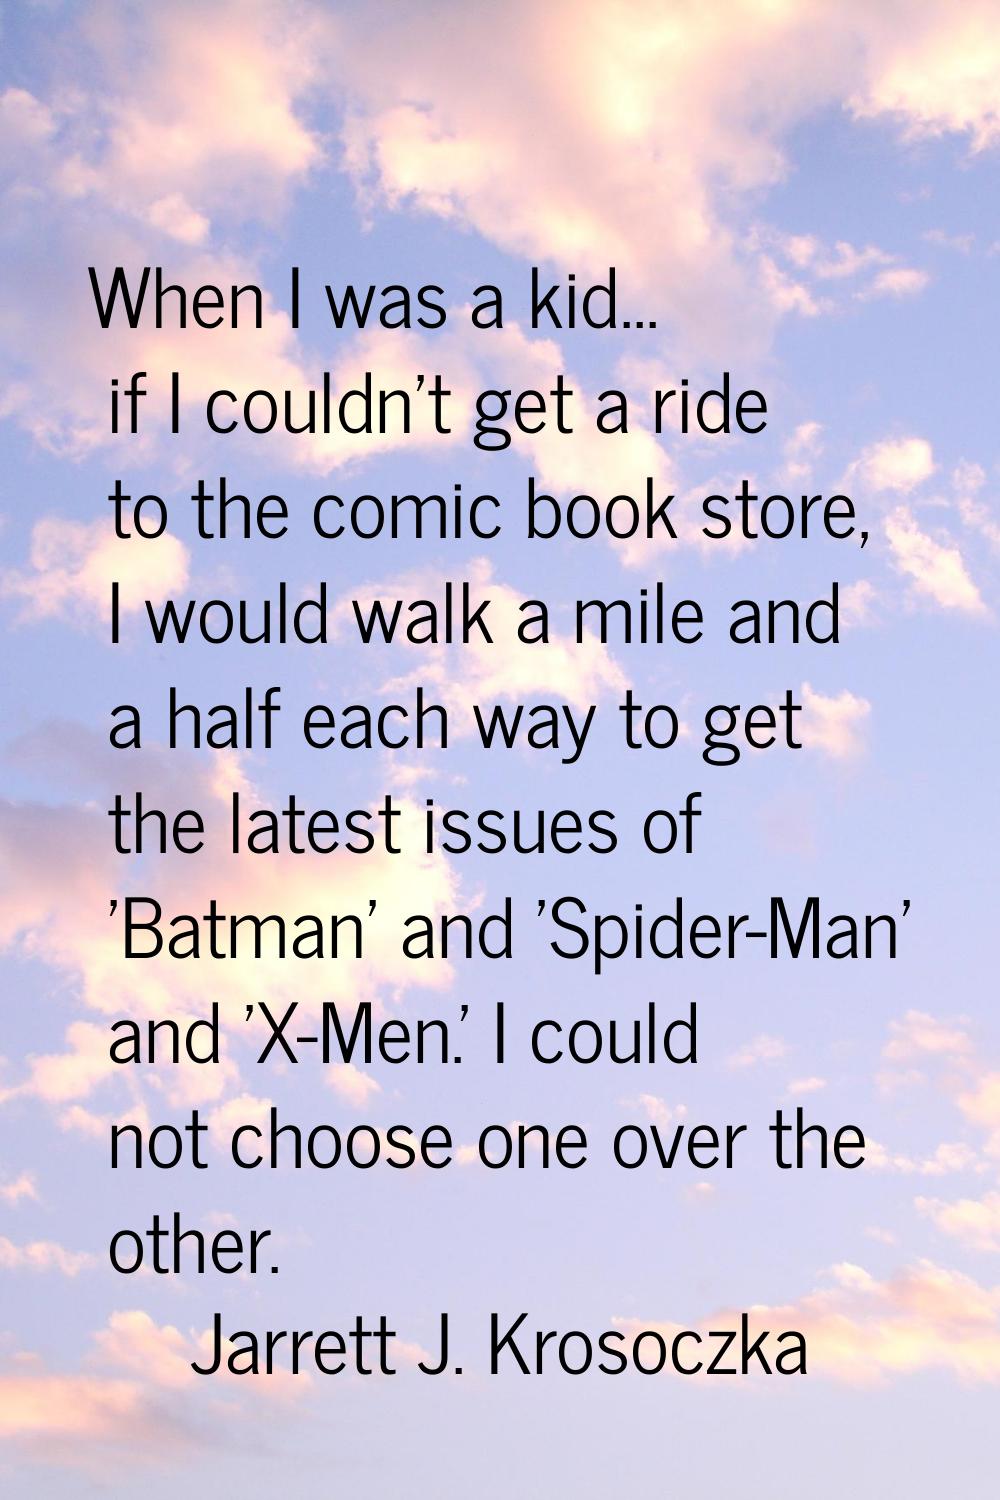 When I was a kid... if I couldn't get a ride to the comic book store, I would walk a mile and a hal